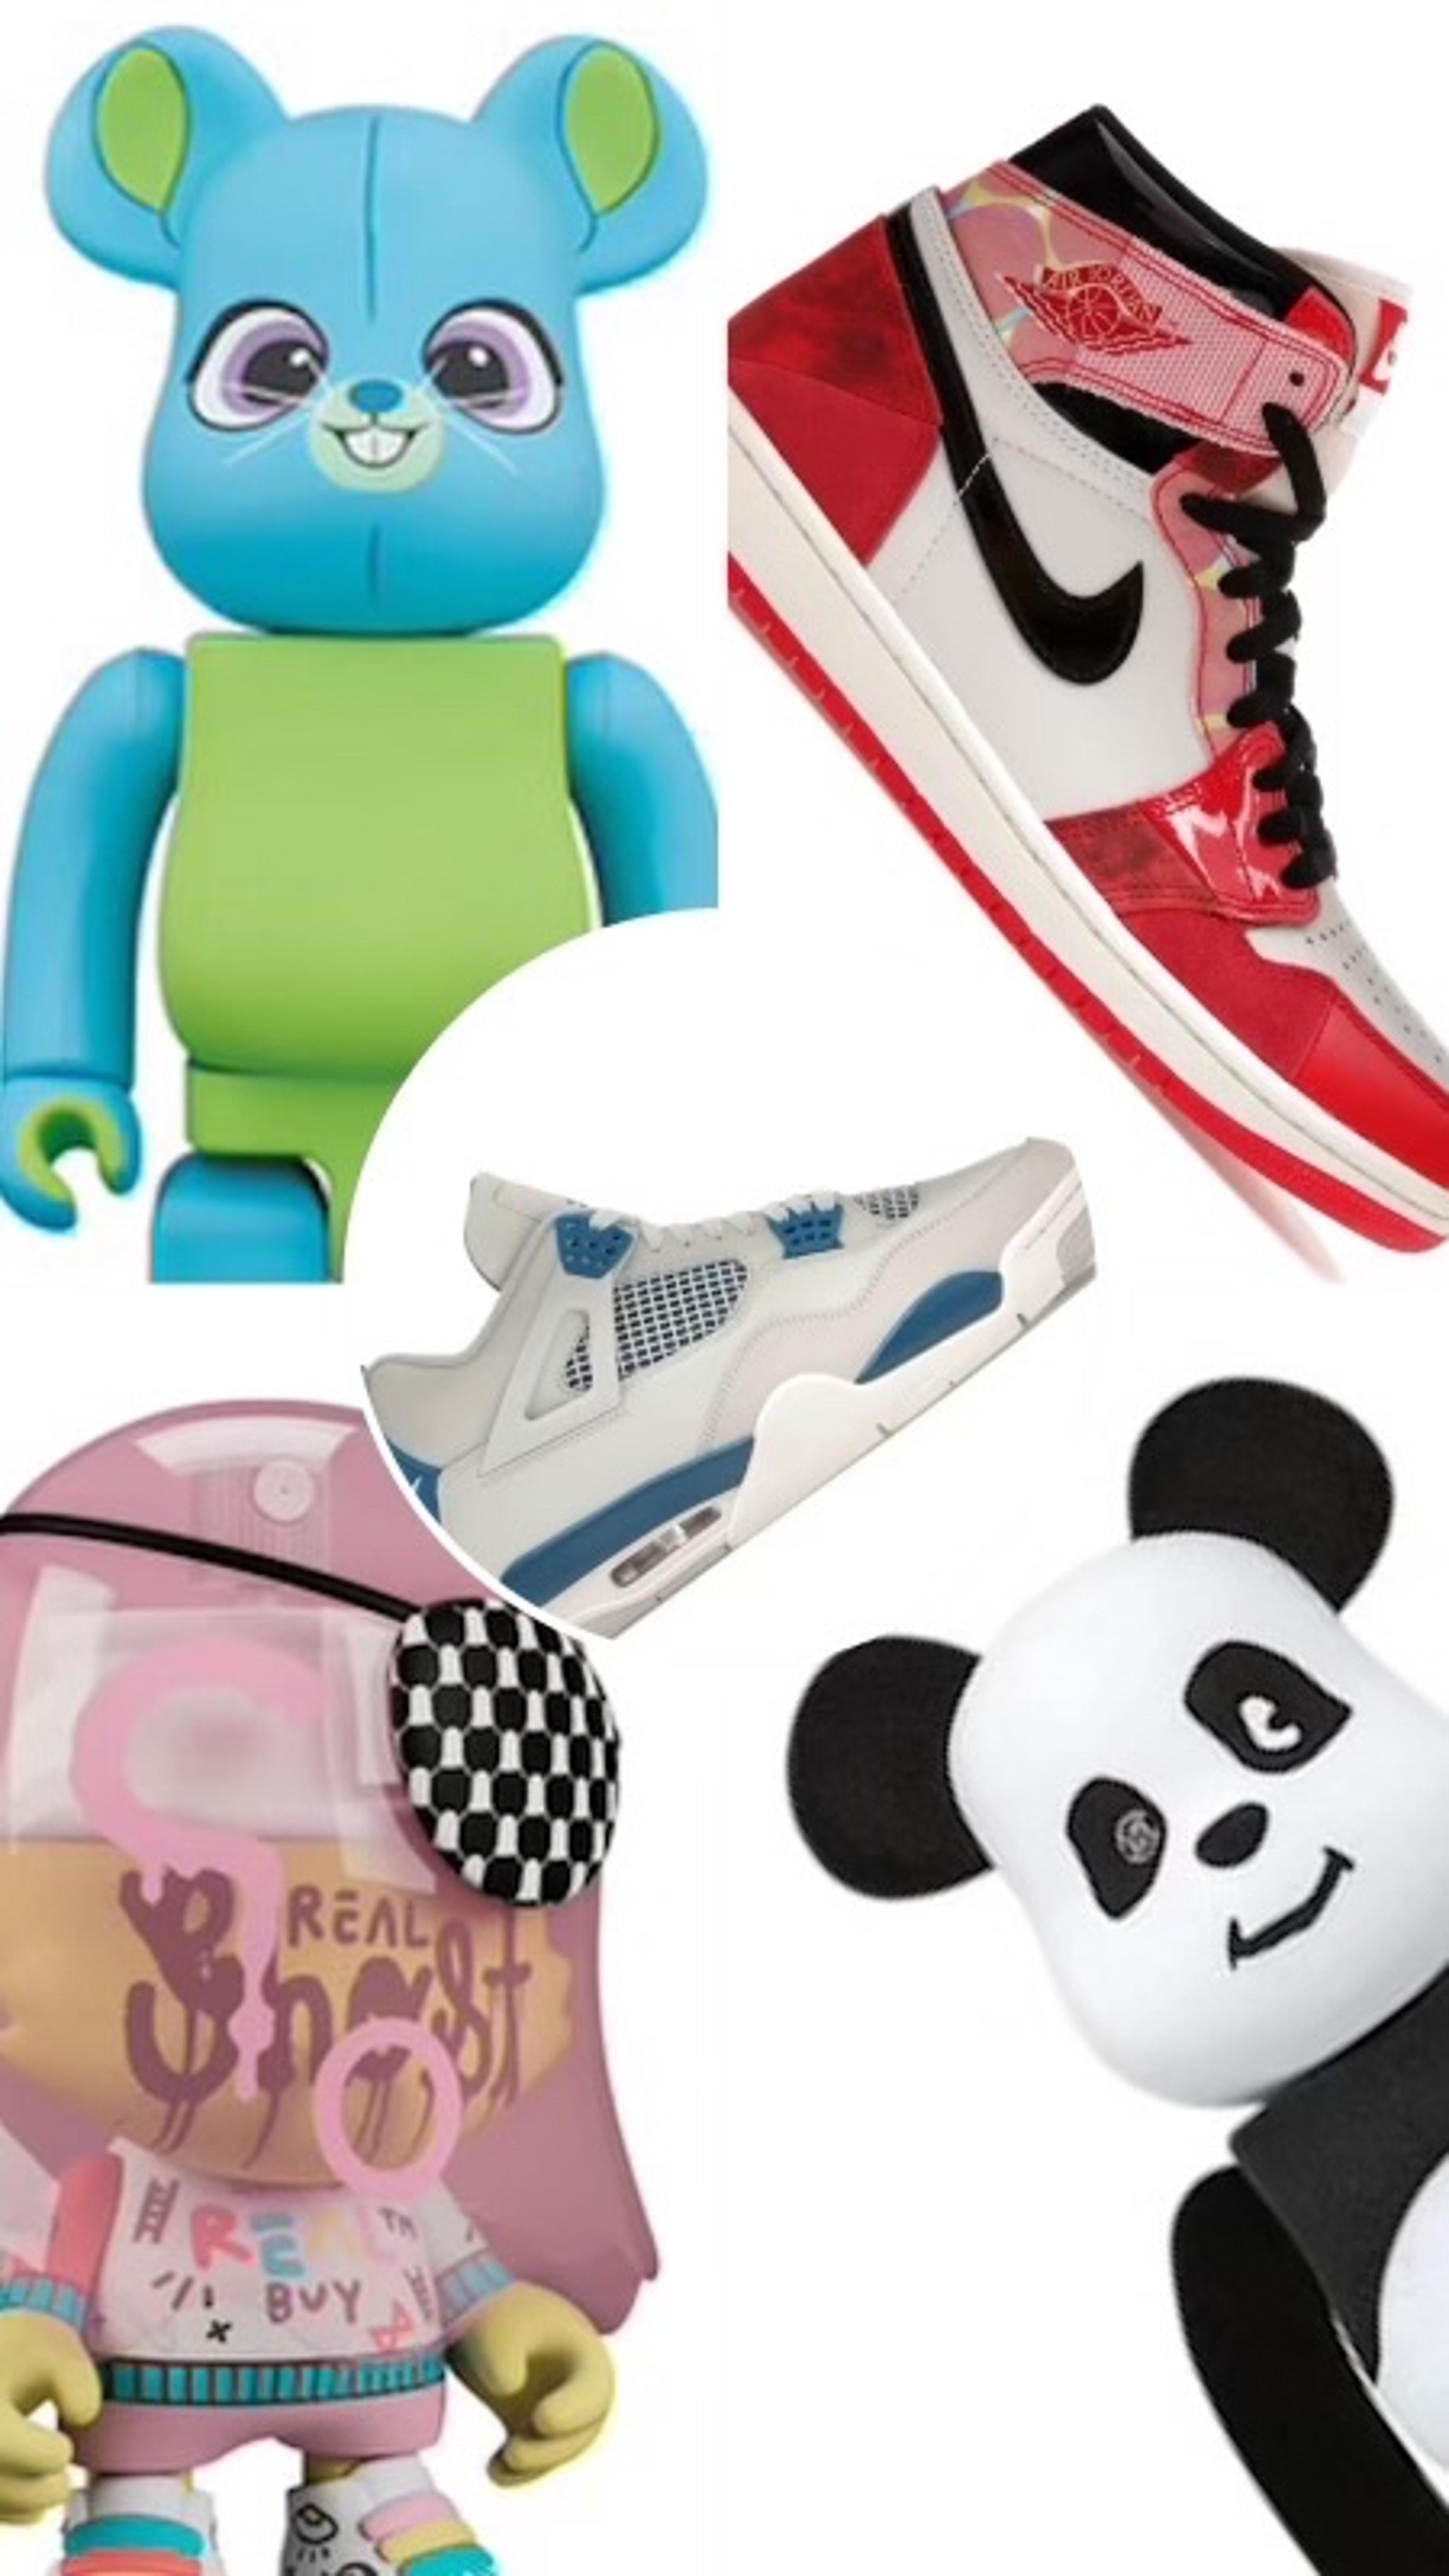 Preview image for the show titled "50x Spots, All Instant Hits!! Jordan's, 400% BE@RBRICKS & More!!" at May 22, 2024